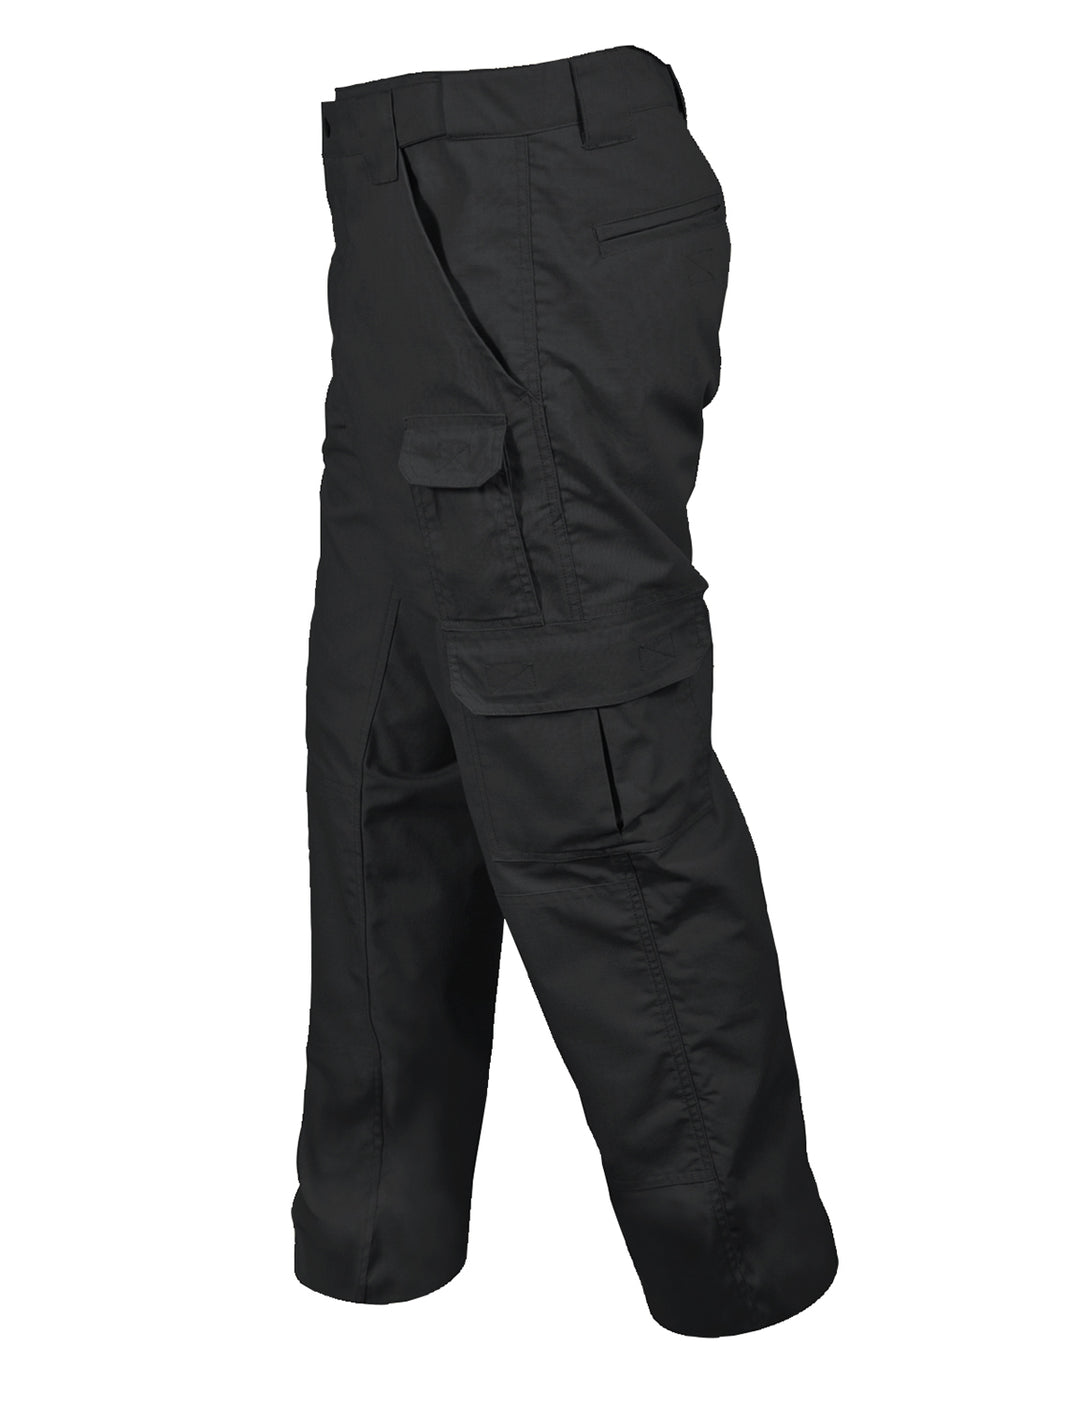 Mens Tactical Duty Pants by Rothco